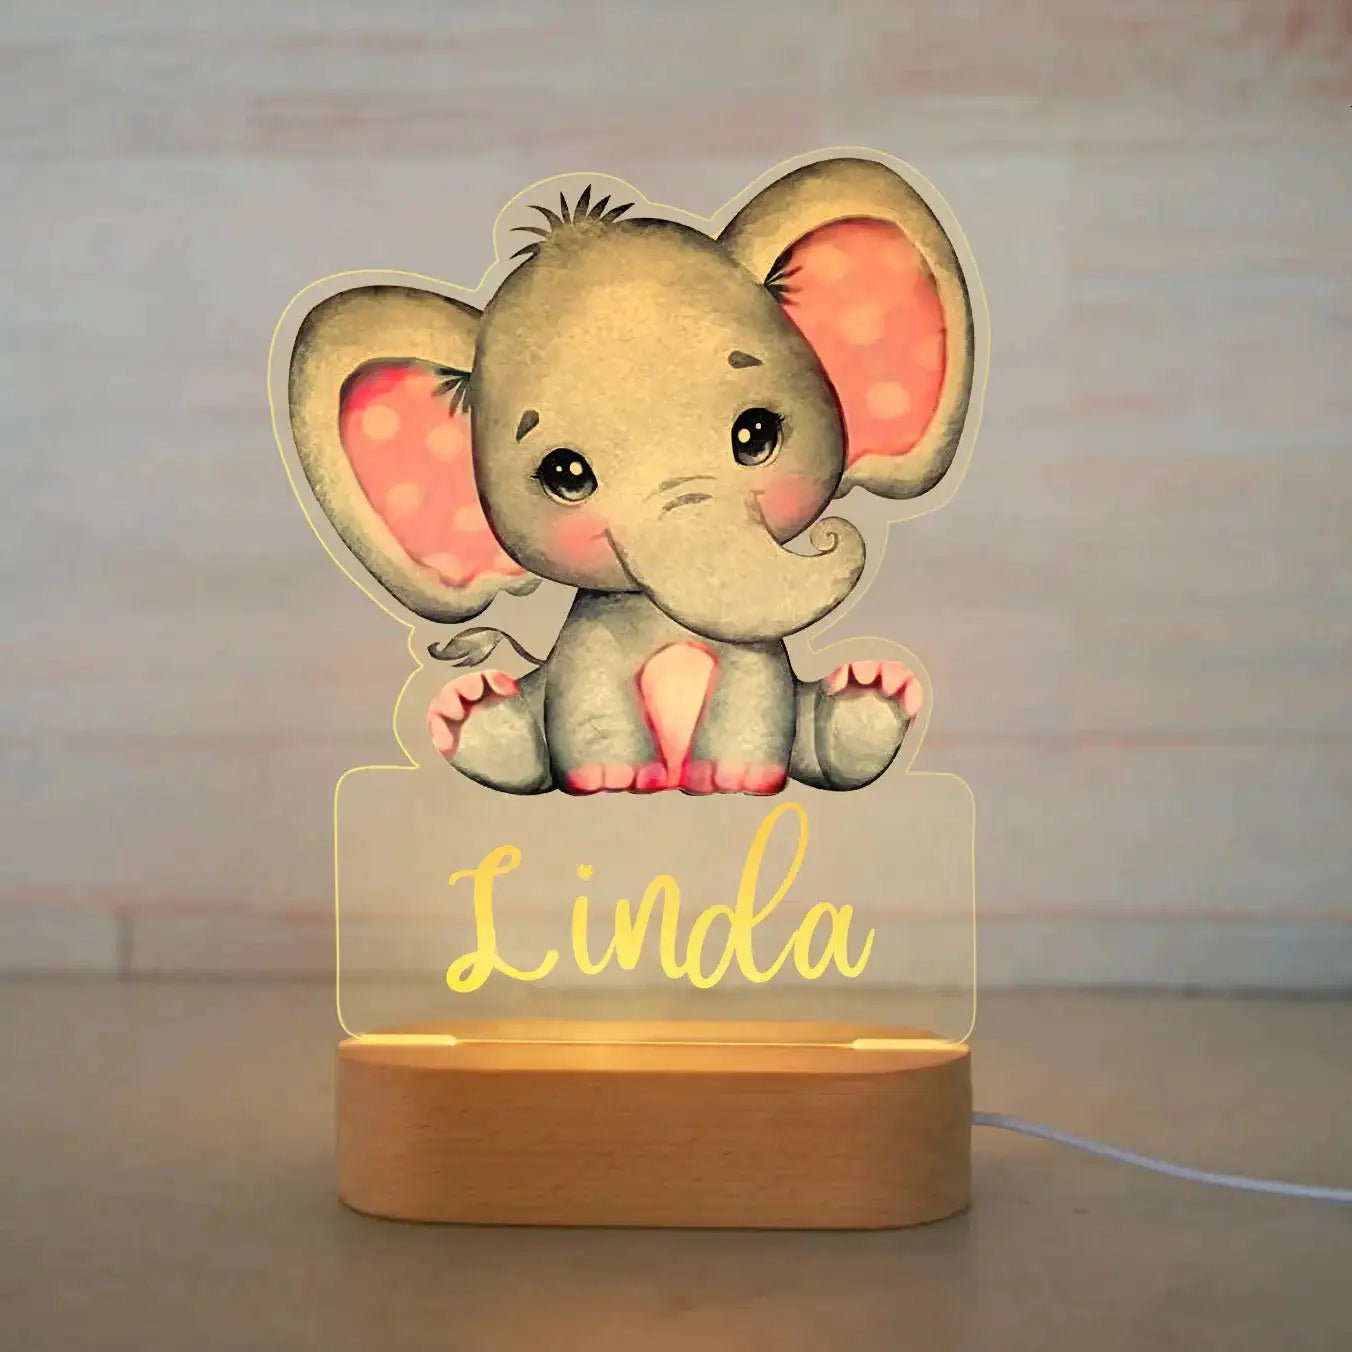 Customized Animal-themed Night Light for Kids - Personalized with Child's Name, Acrylic Lamp for Bedroom Decor Warm Light / 02Elephant